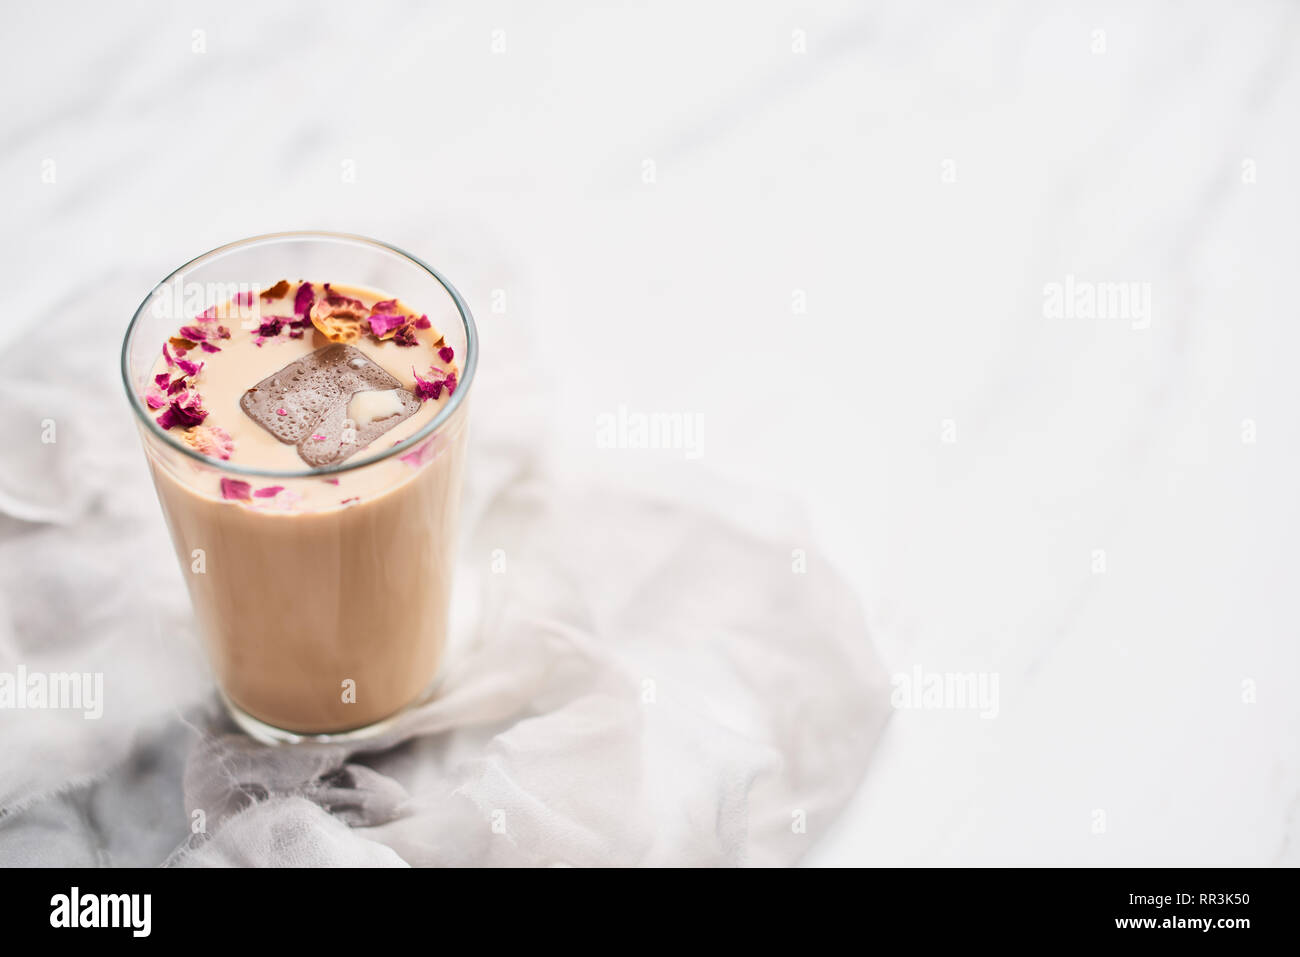 Iced coffee with rose and cardamom in a tall glass on white and gray silk background. Copy space for text. Stock Photo